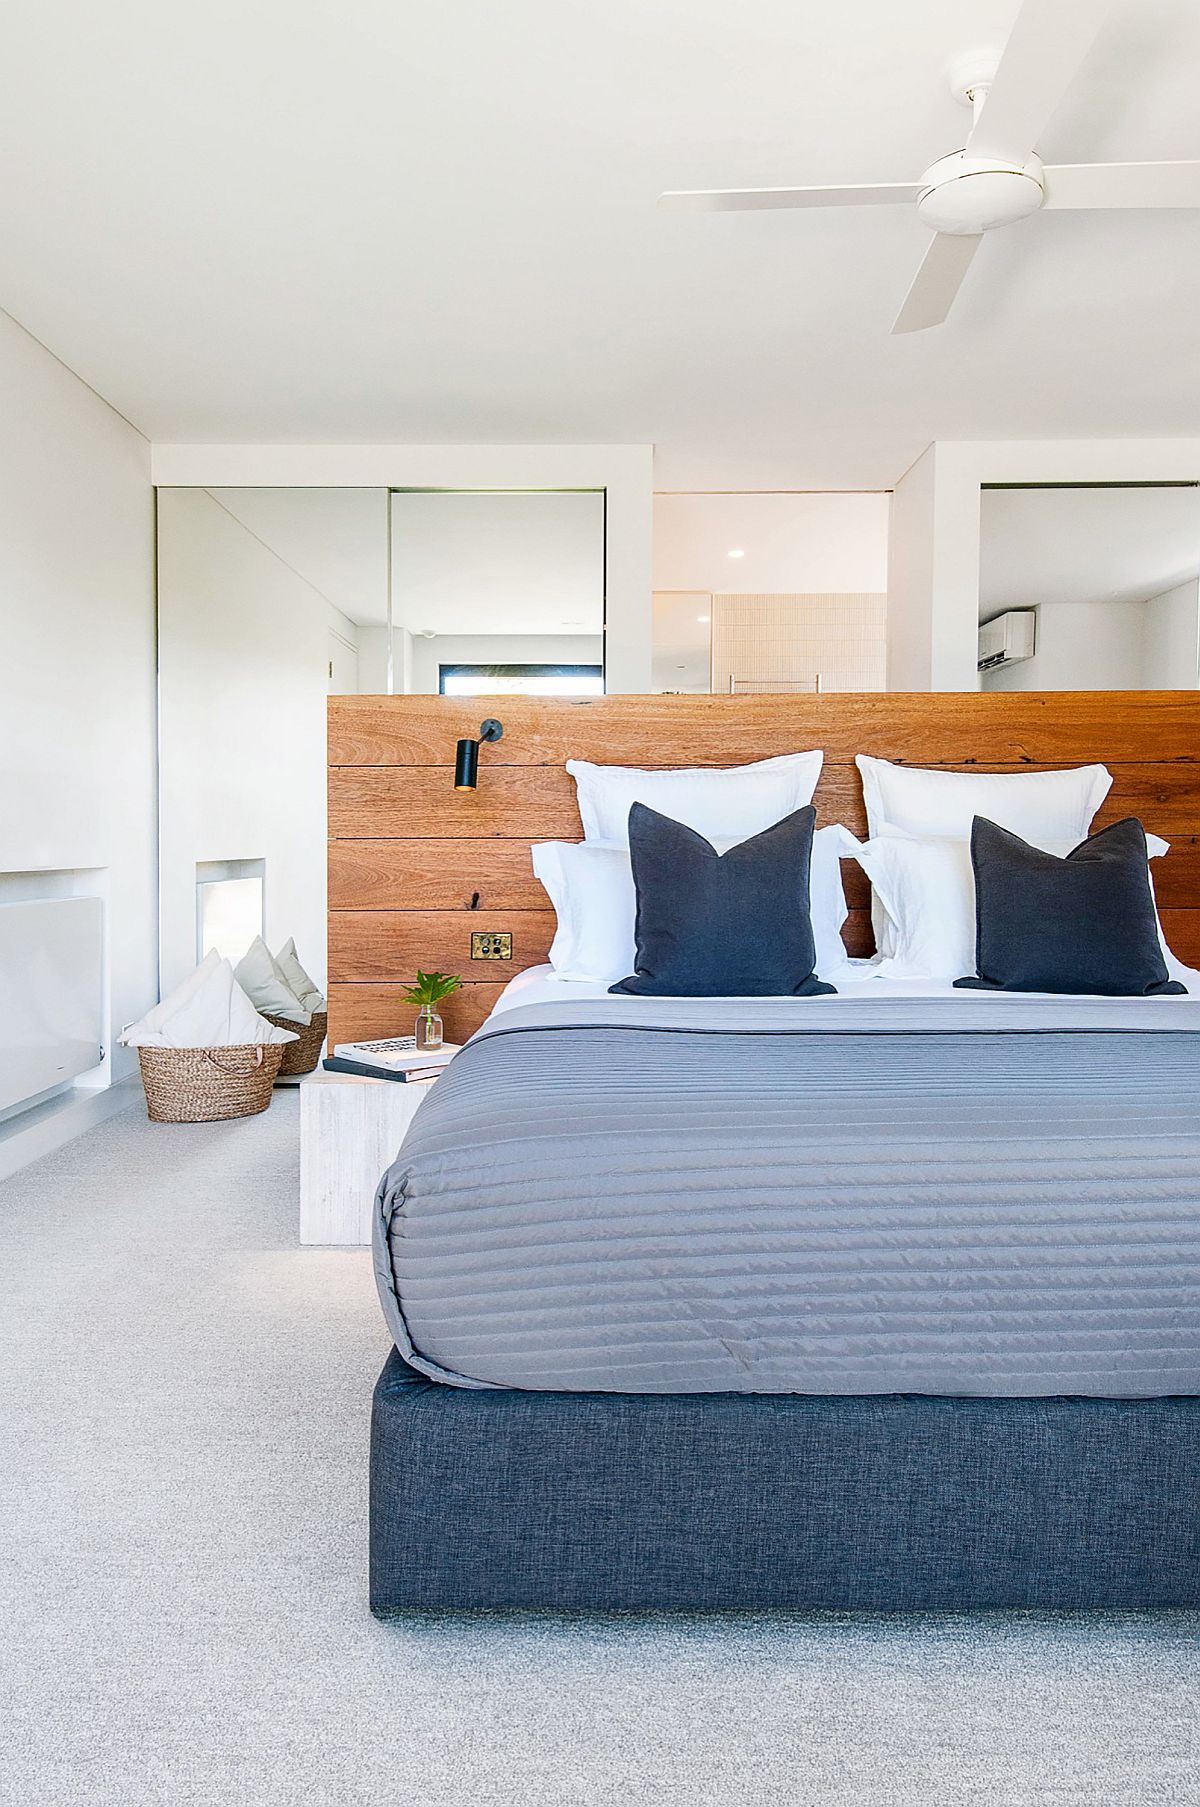 Headboard acts as a visual partition in this relaxing bedroom